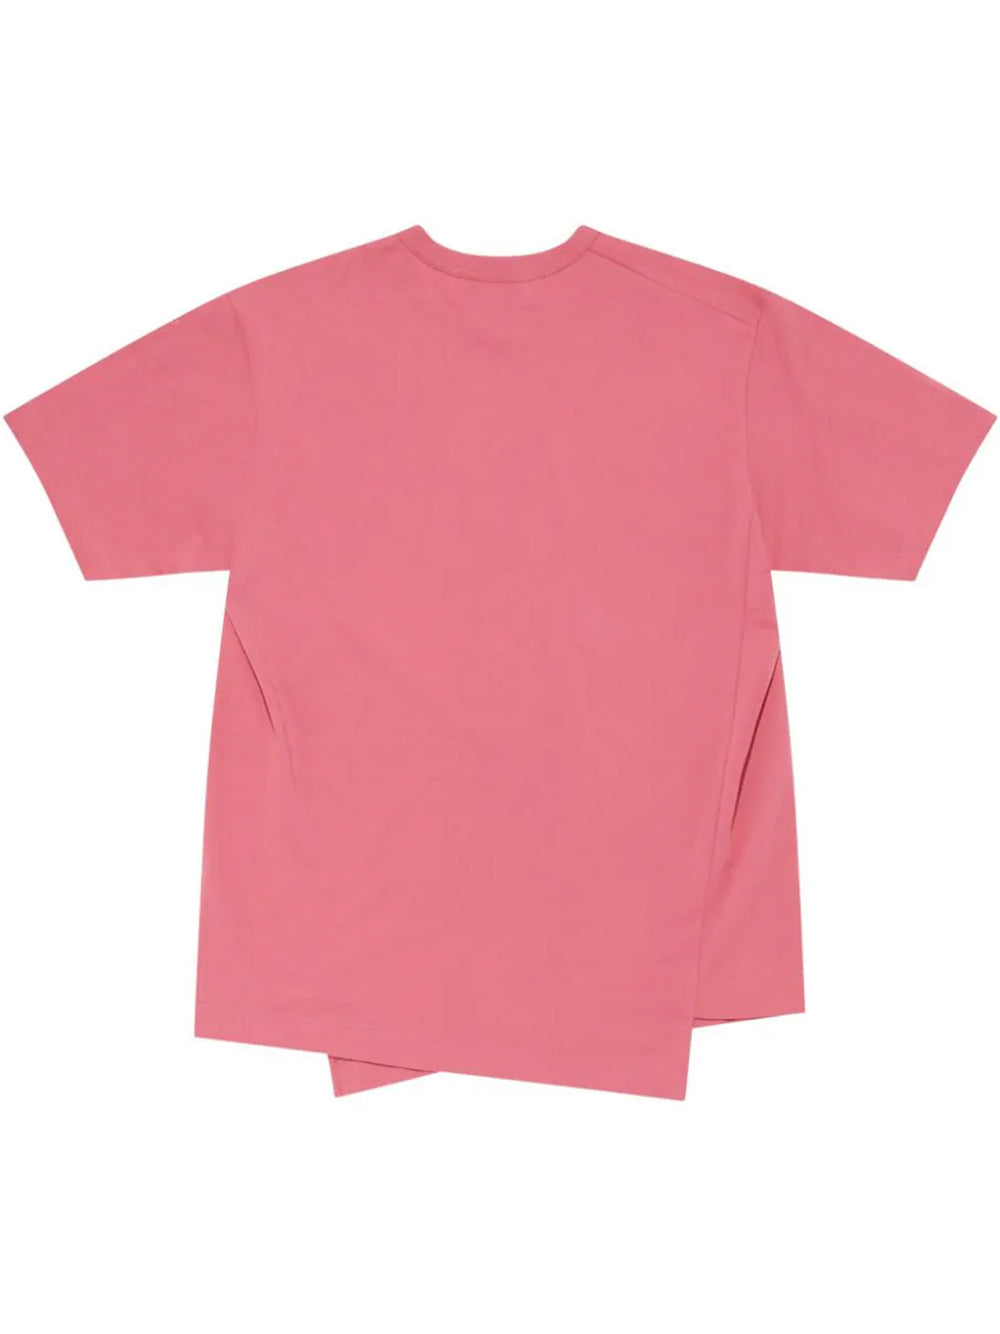 Comme-Des-Garcons-Shirt-Lacoste-X-Cdg-Shirt-Embroidery-Tee-Pink-2